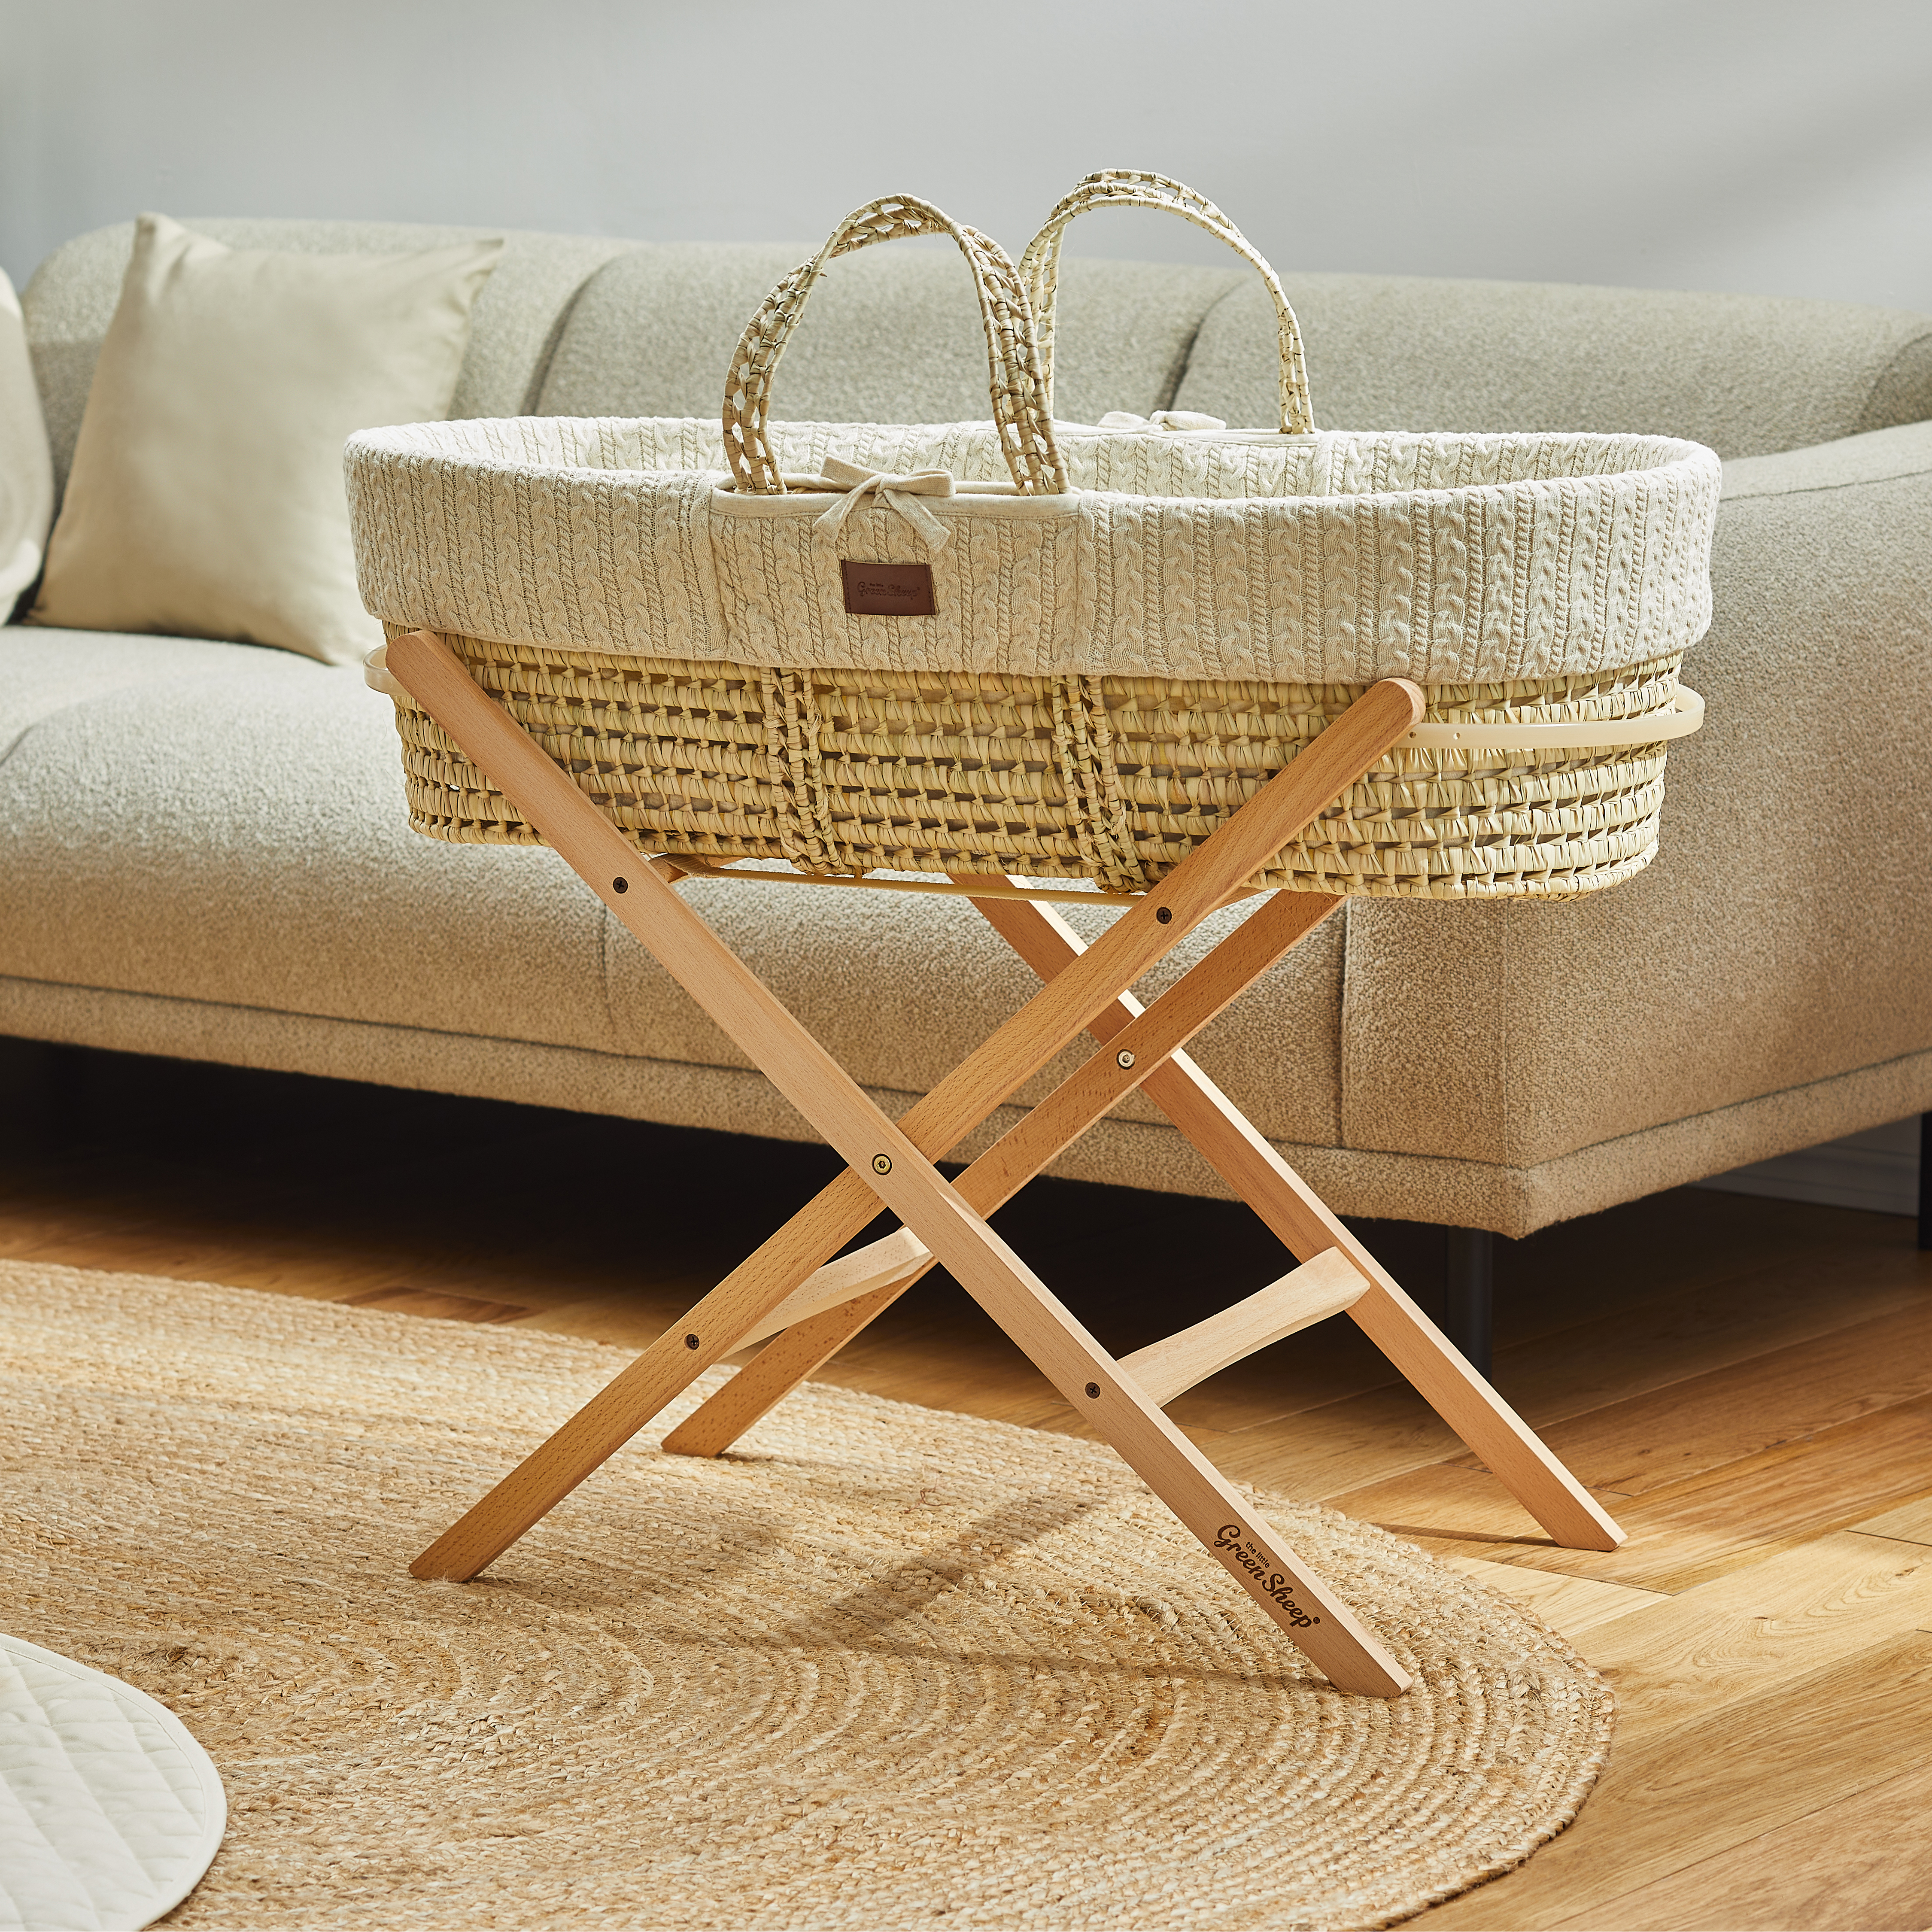 The Little Green Sheep Moses basket offers a portable sleeping space